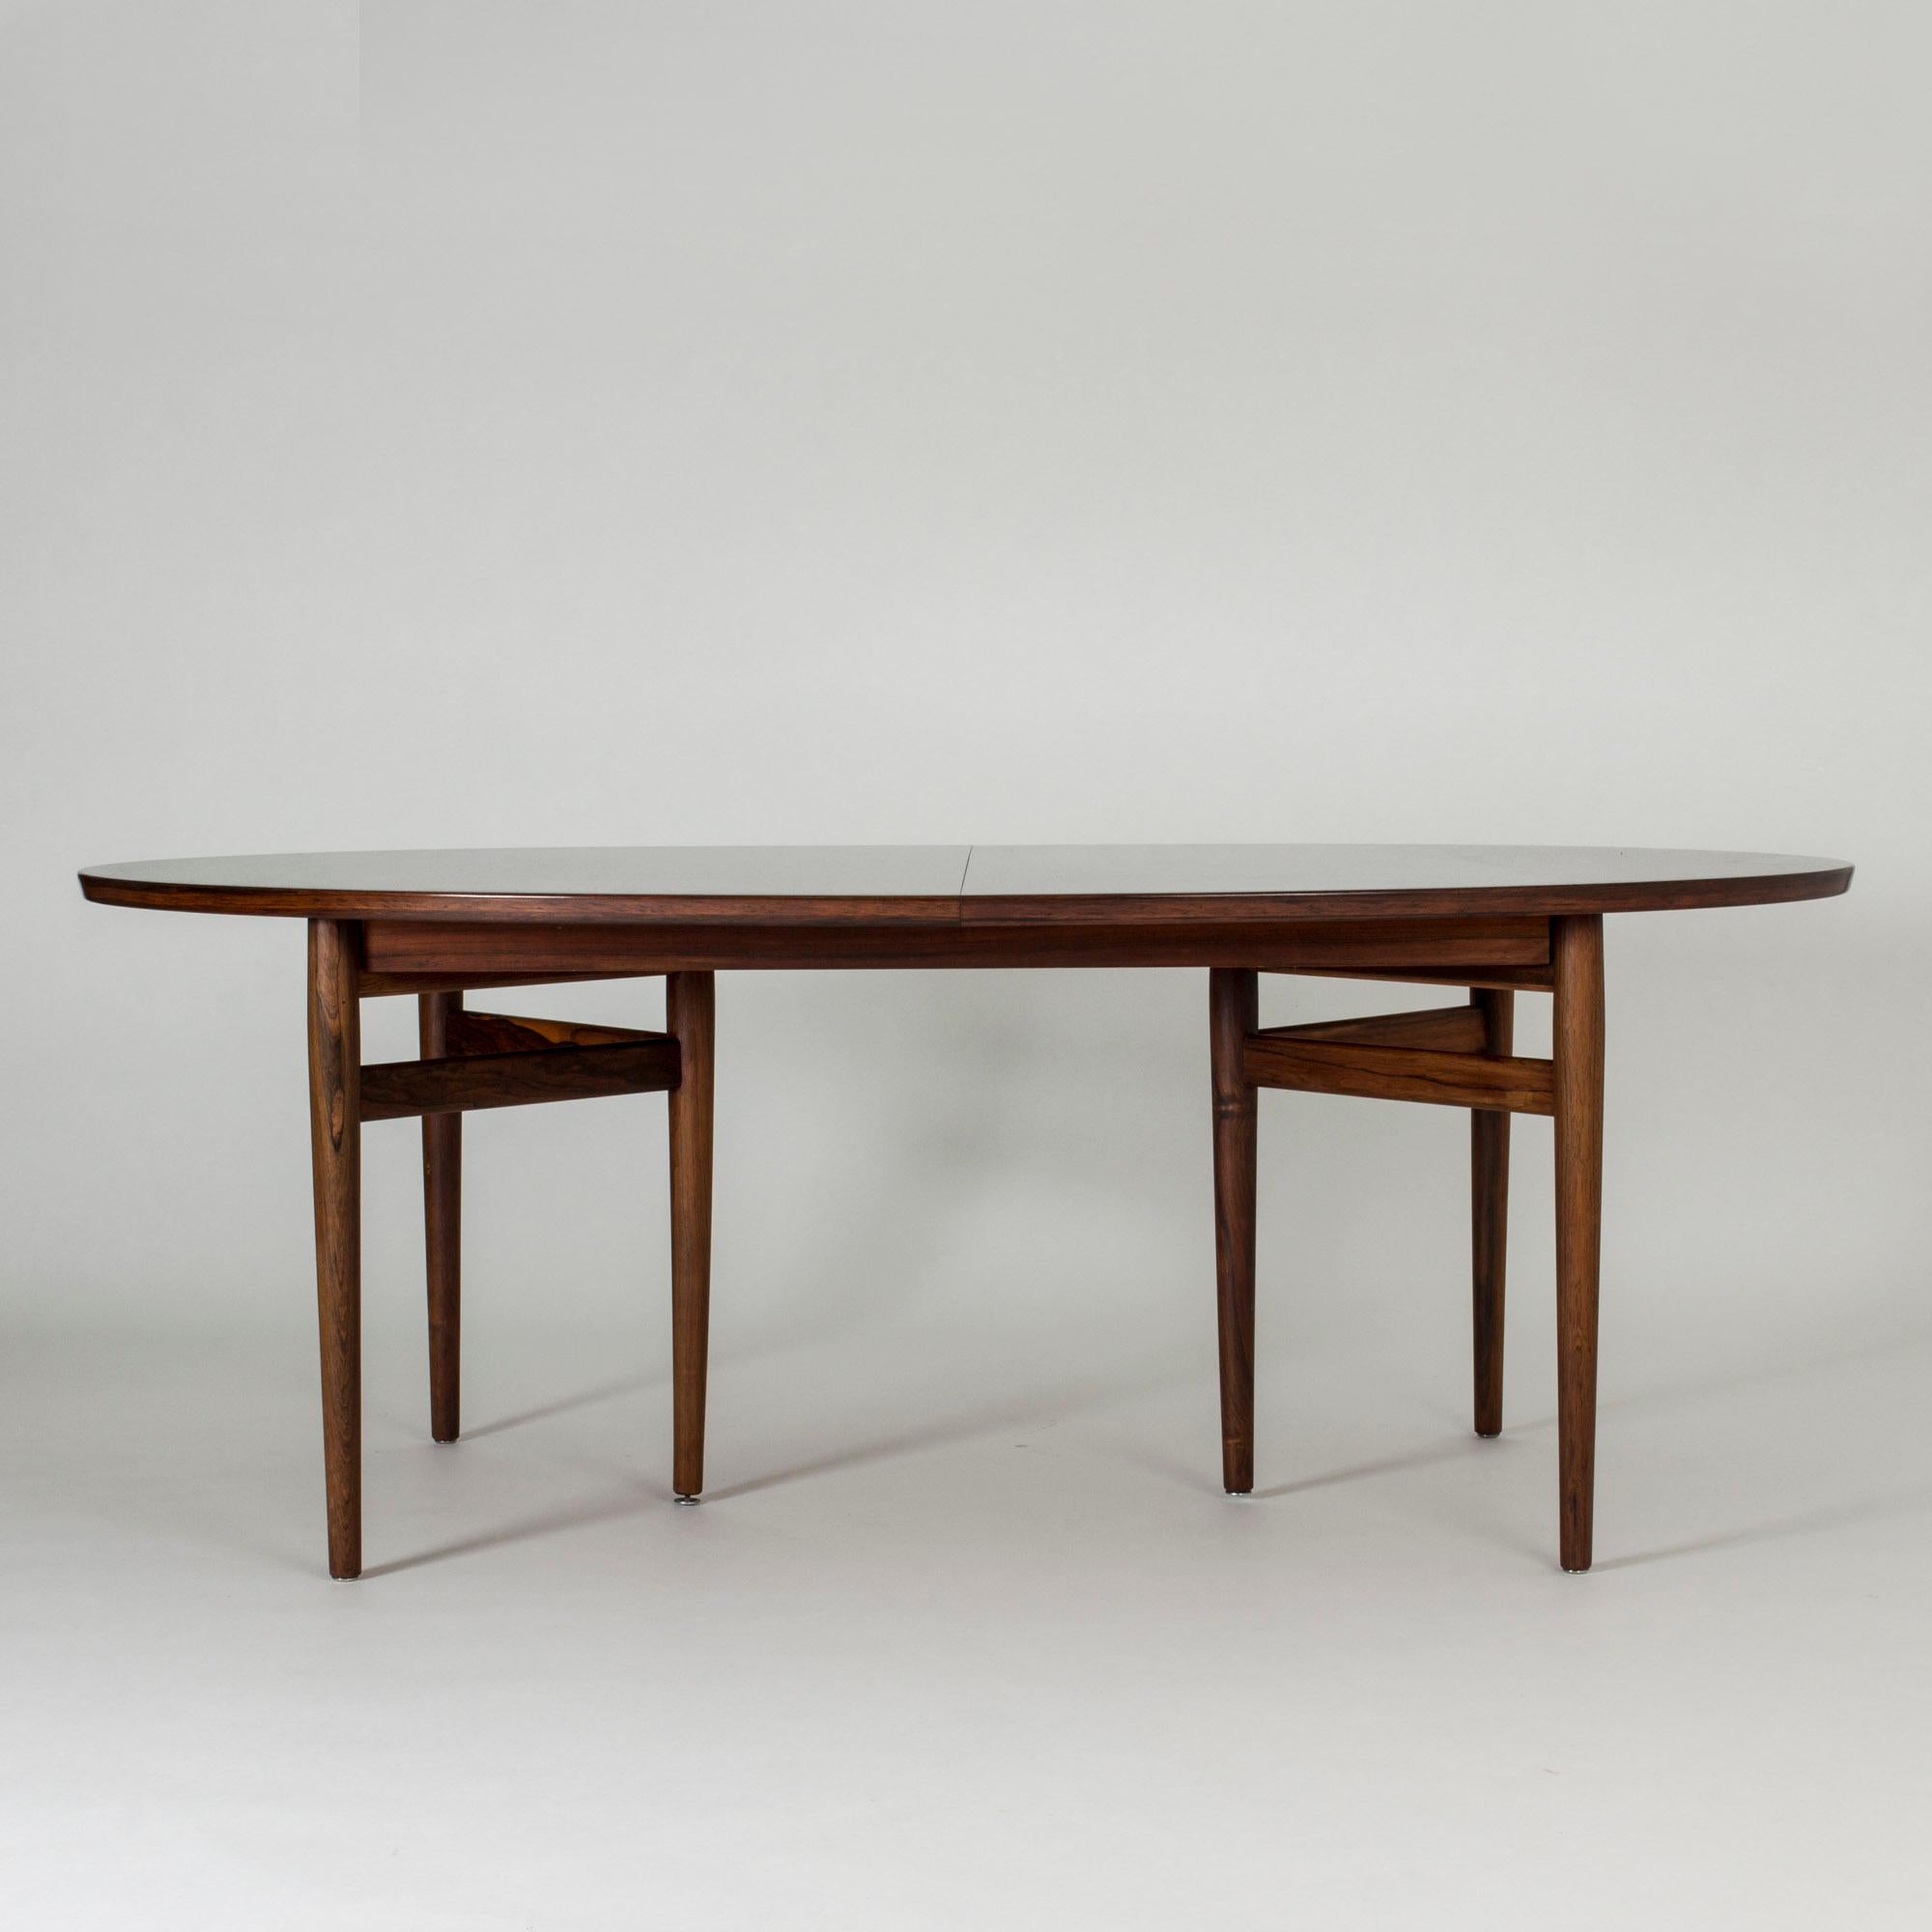 Large, oval dining table by Arne Vodder, made from rosewood. Six legs set in a triangular formation at each end. Two extension leaves that match the nuance of the table very well.

Measure: Width 197.5 + 49.5 + 49.5 cm.